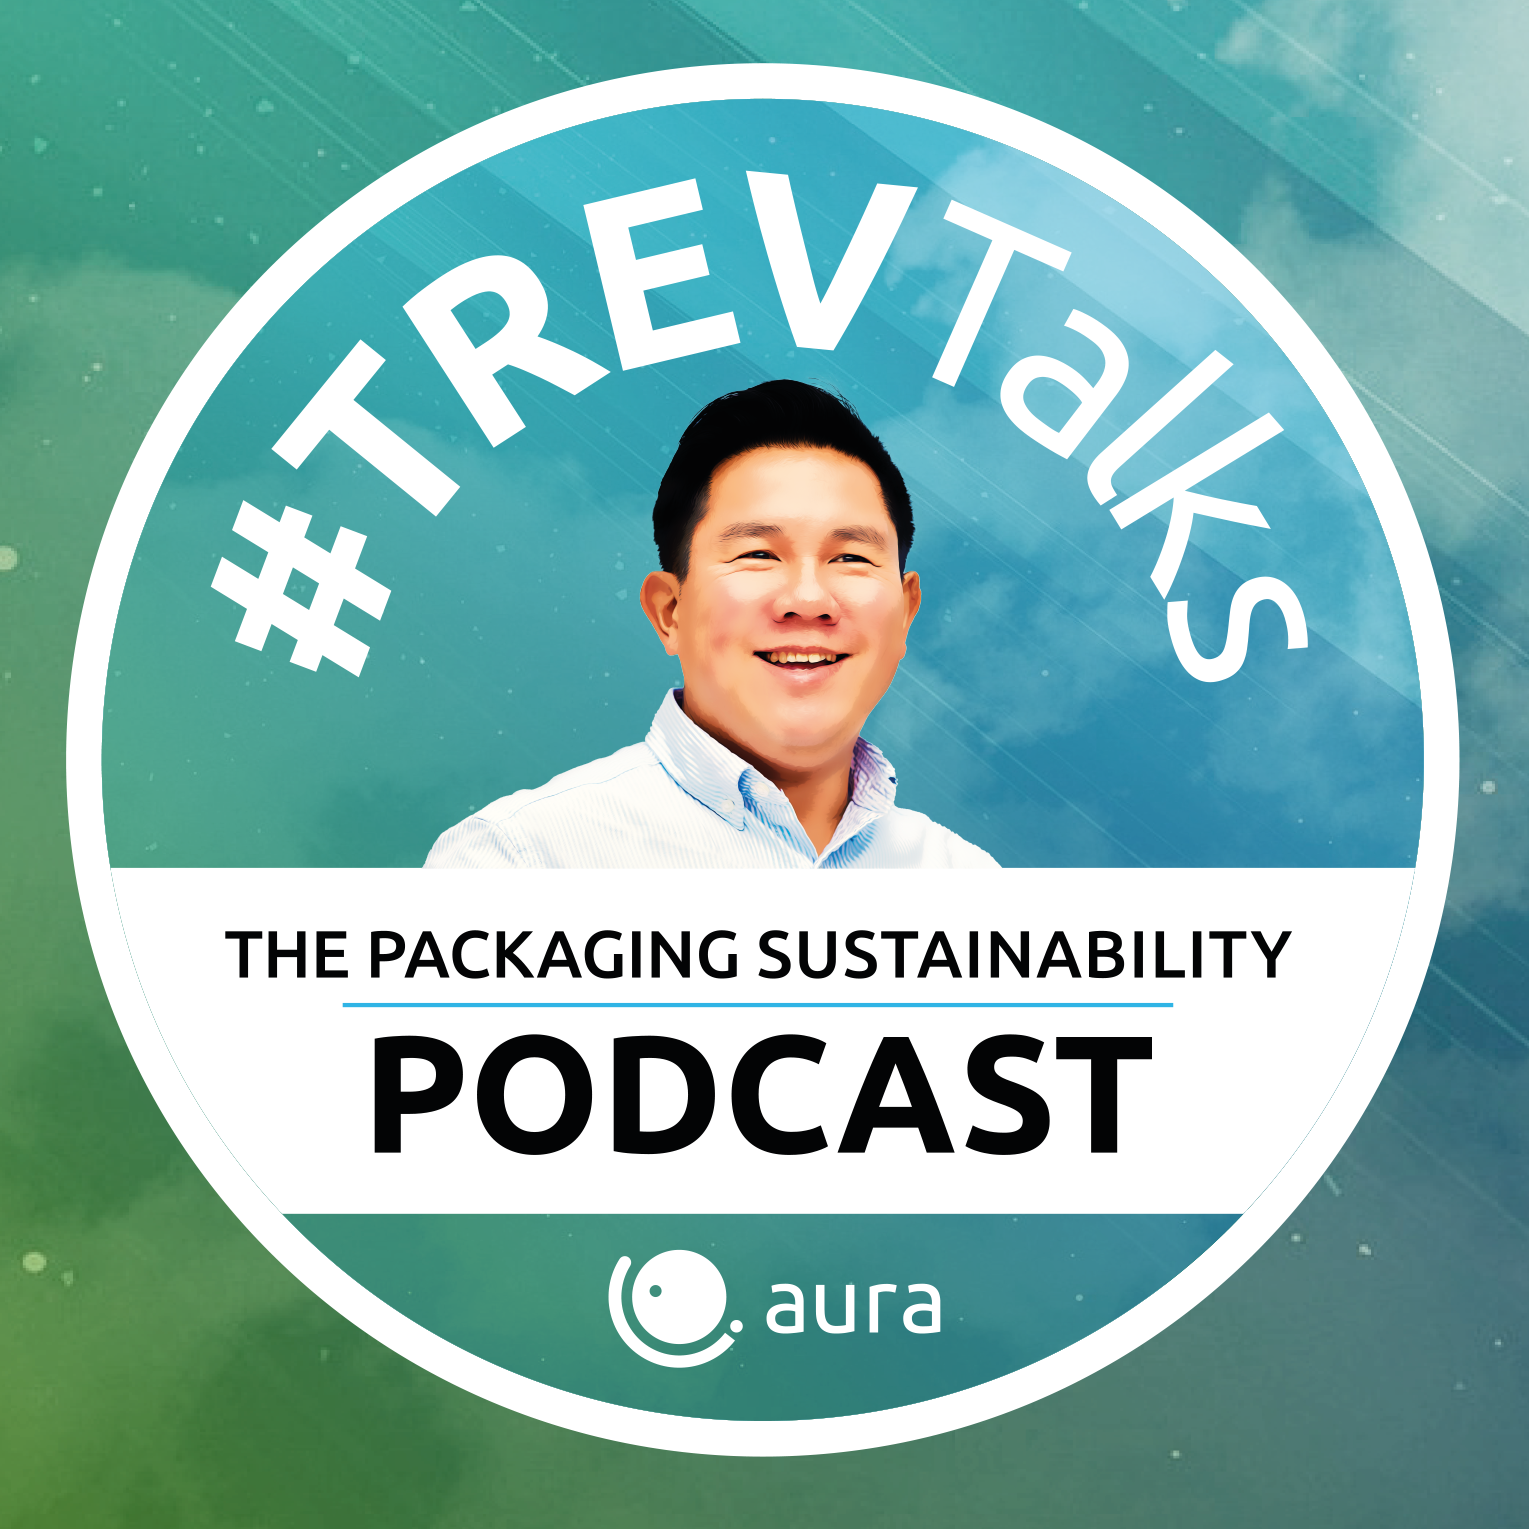 Introducing the #TREVTalks podcast